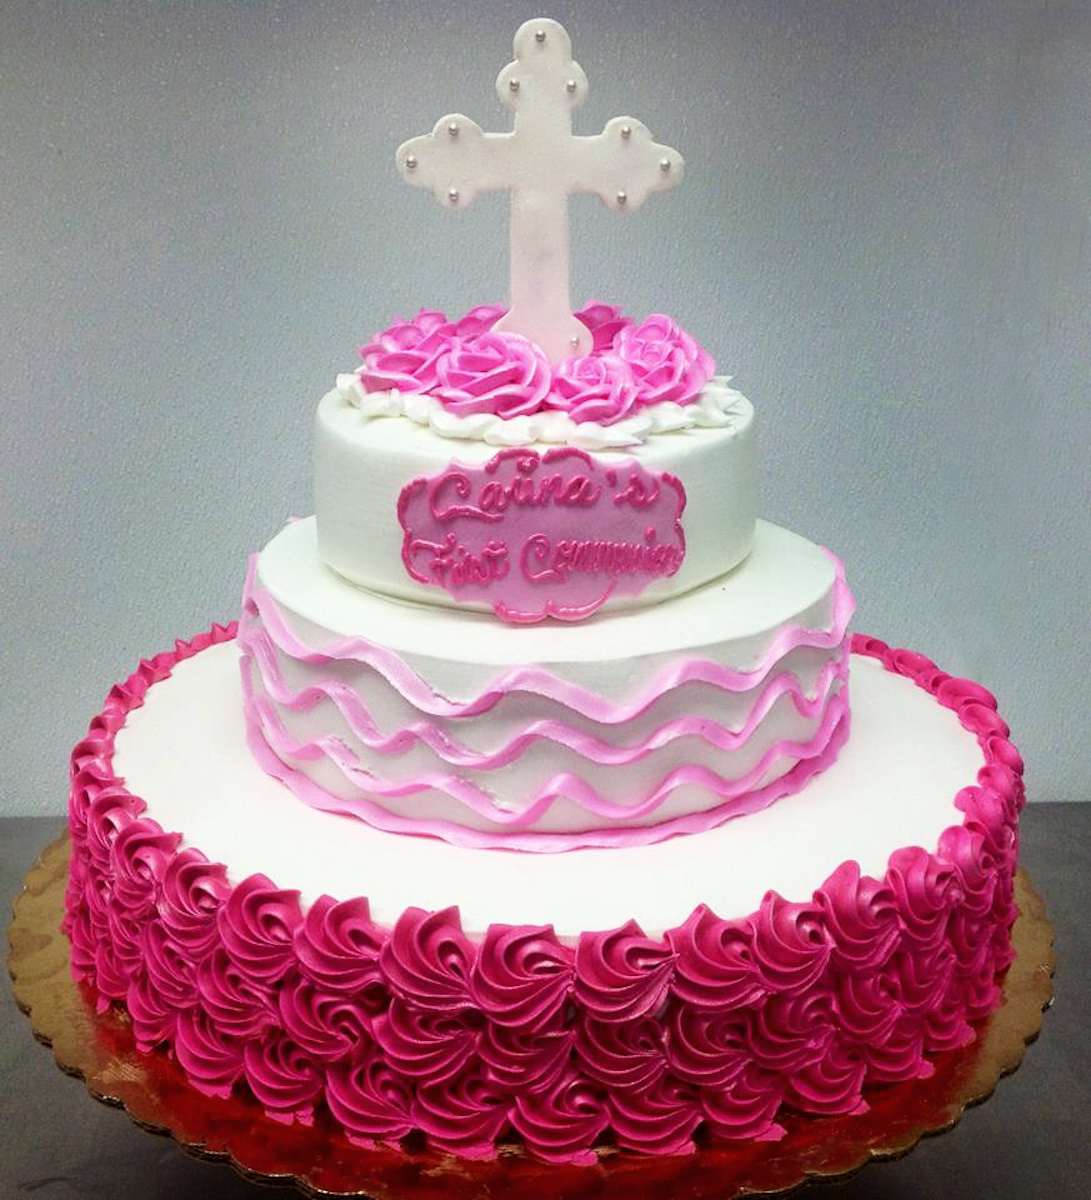 Cake Design For Church Anniversary / 1000+ images about Church 50th Anniversary ideas on ...